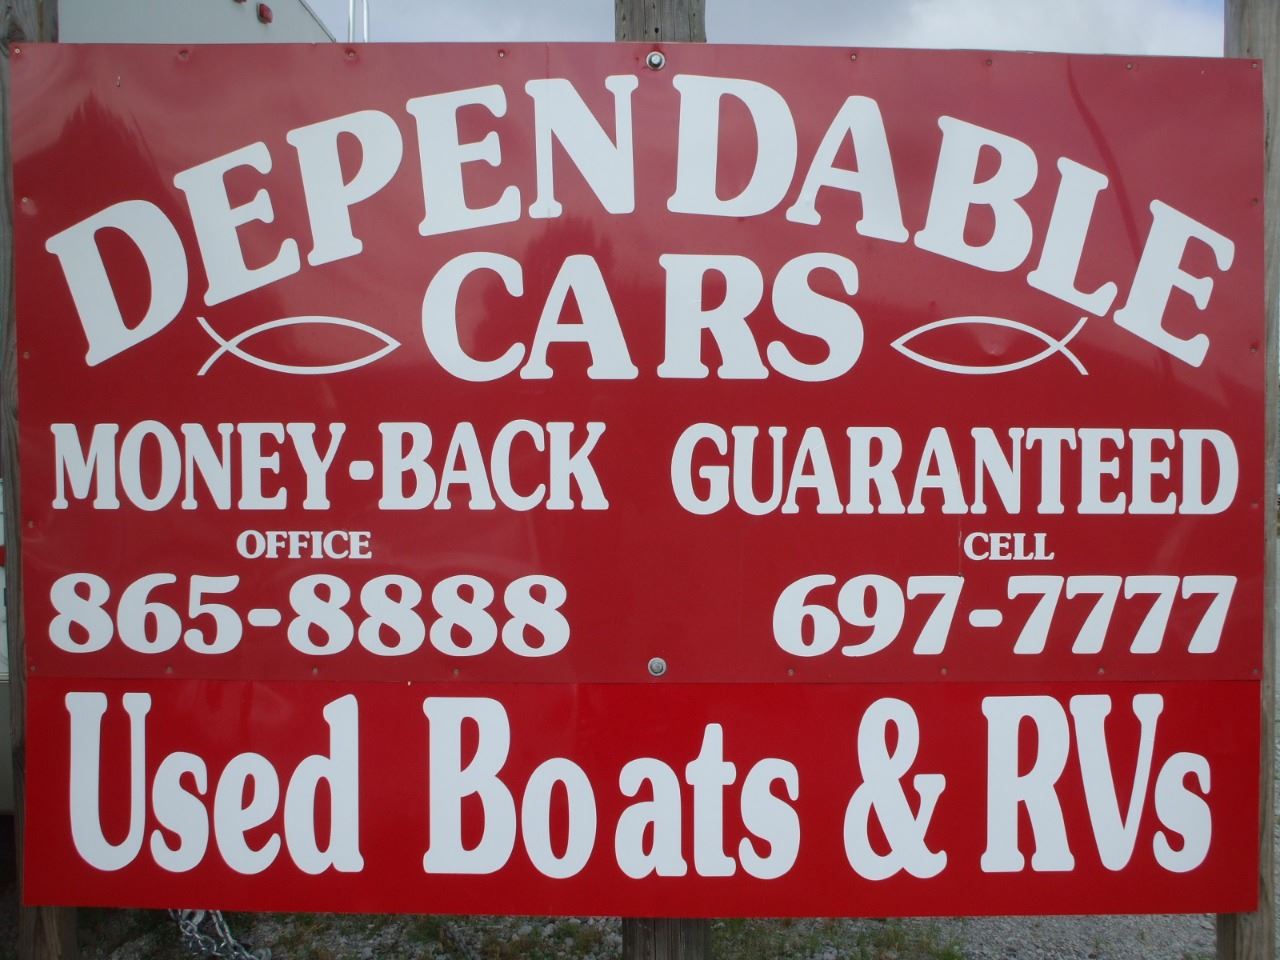 DEPENDABLE CARS